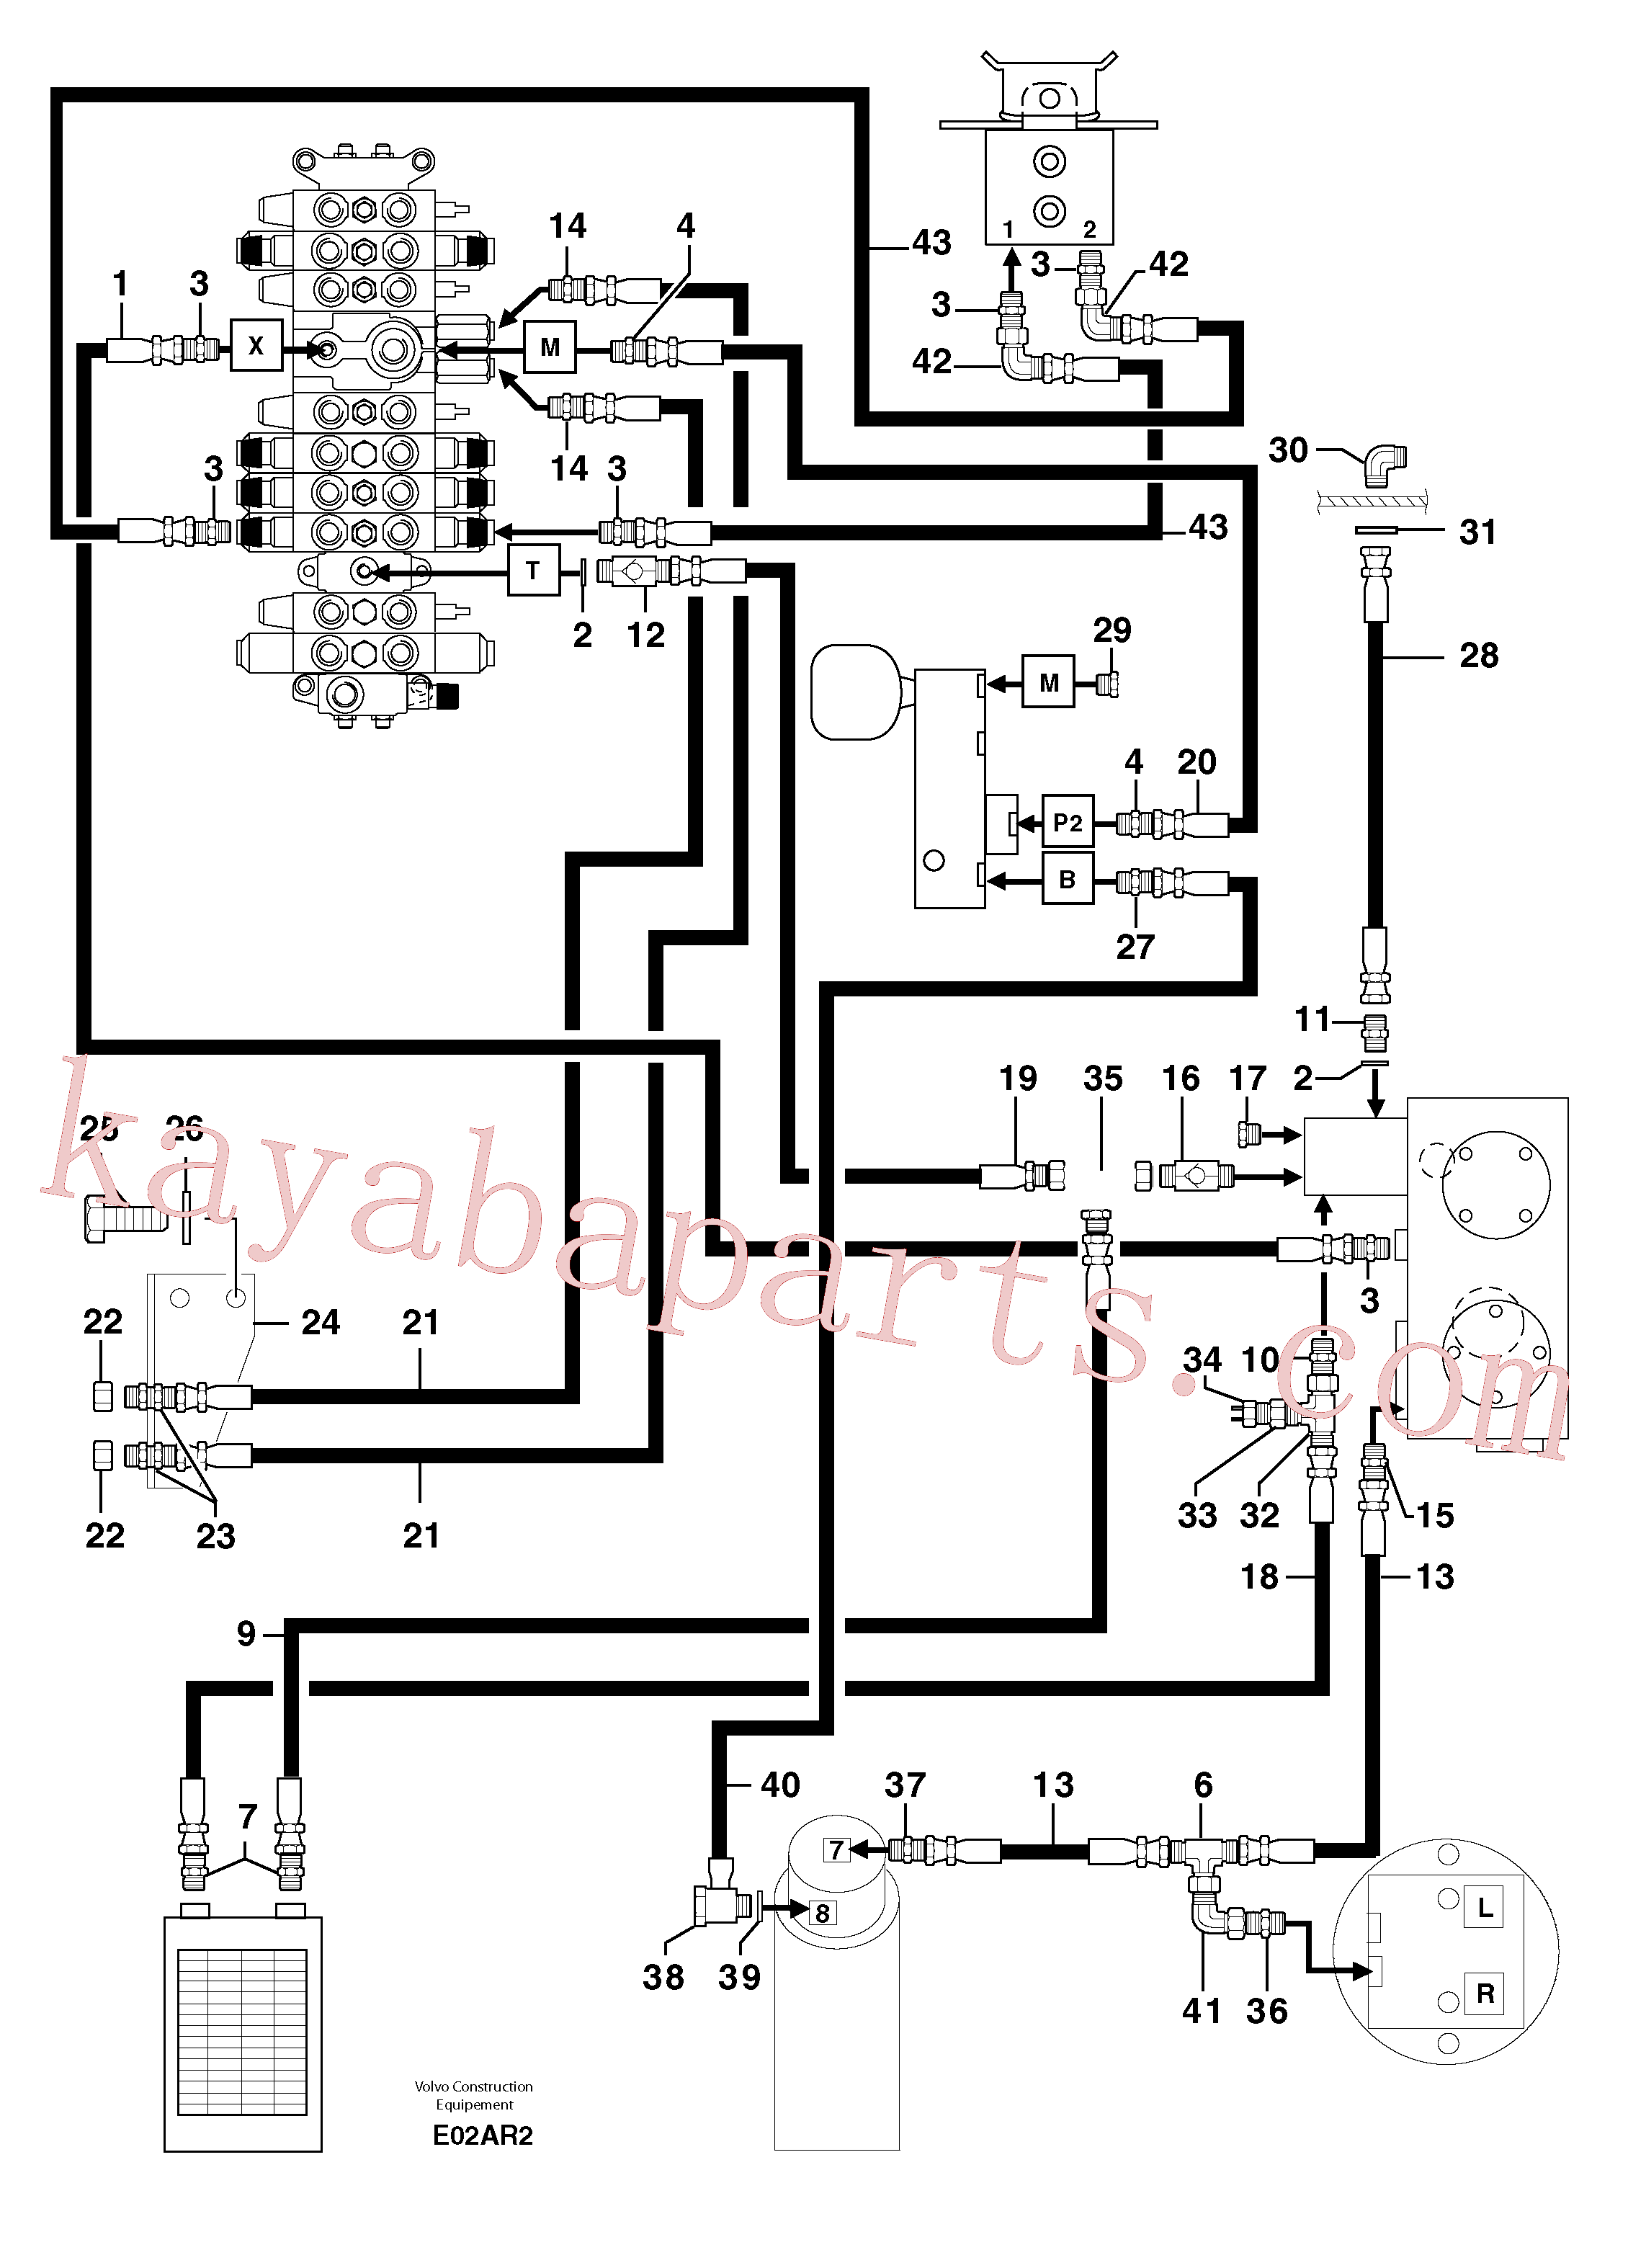 PJ4770042 for Volvo Attachments supply and return circuit(E02AR2 assembly)